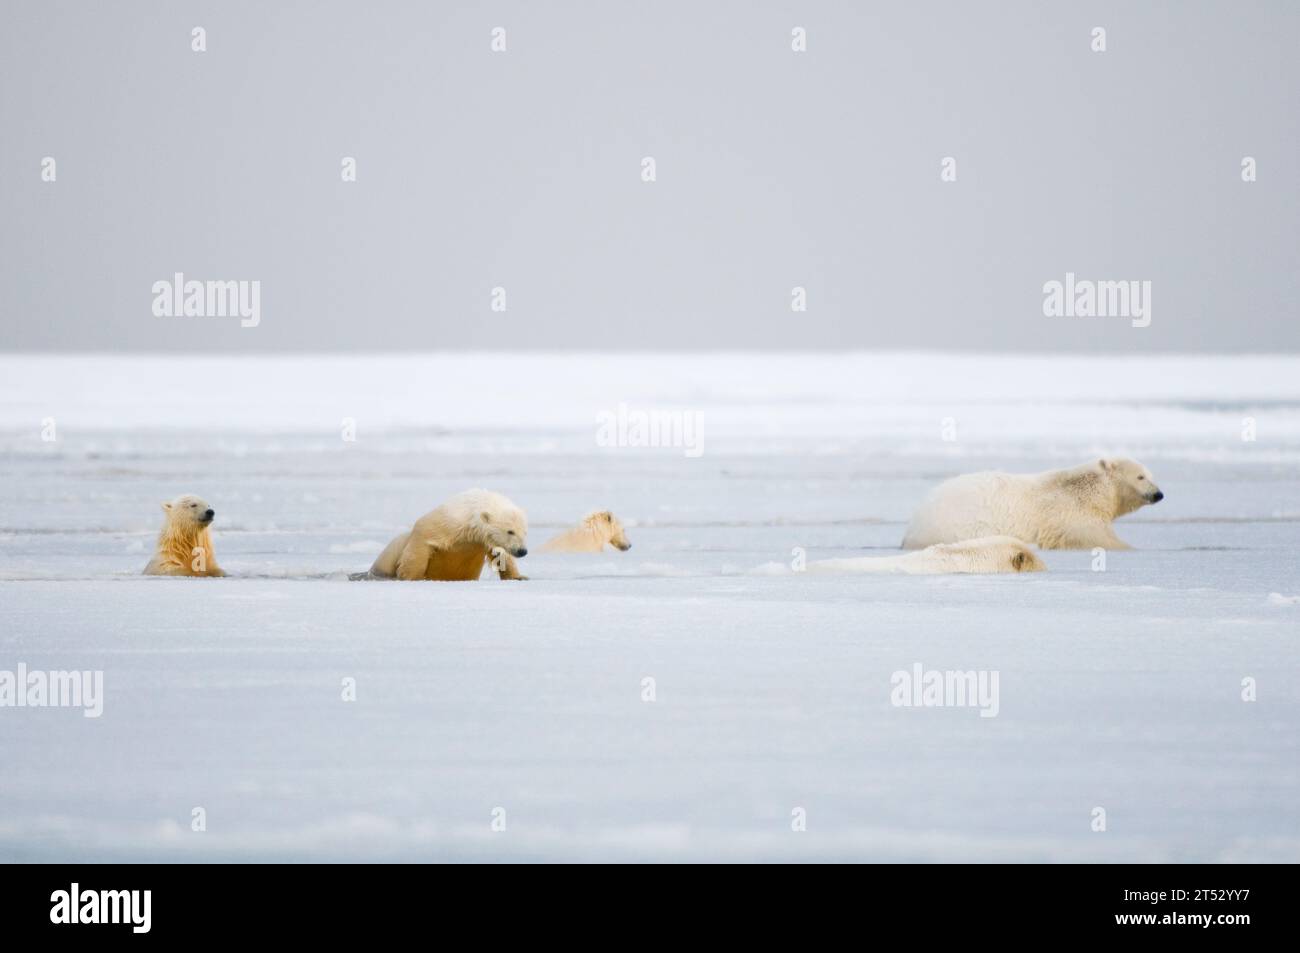 polar bears Ursus maritimus sows with spring cubs move through slushy newly forming pack ice along Bernard Spit during fall freeze up, 1002 ANWR AK Stock Photo